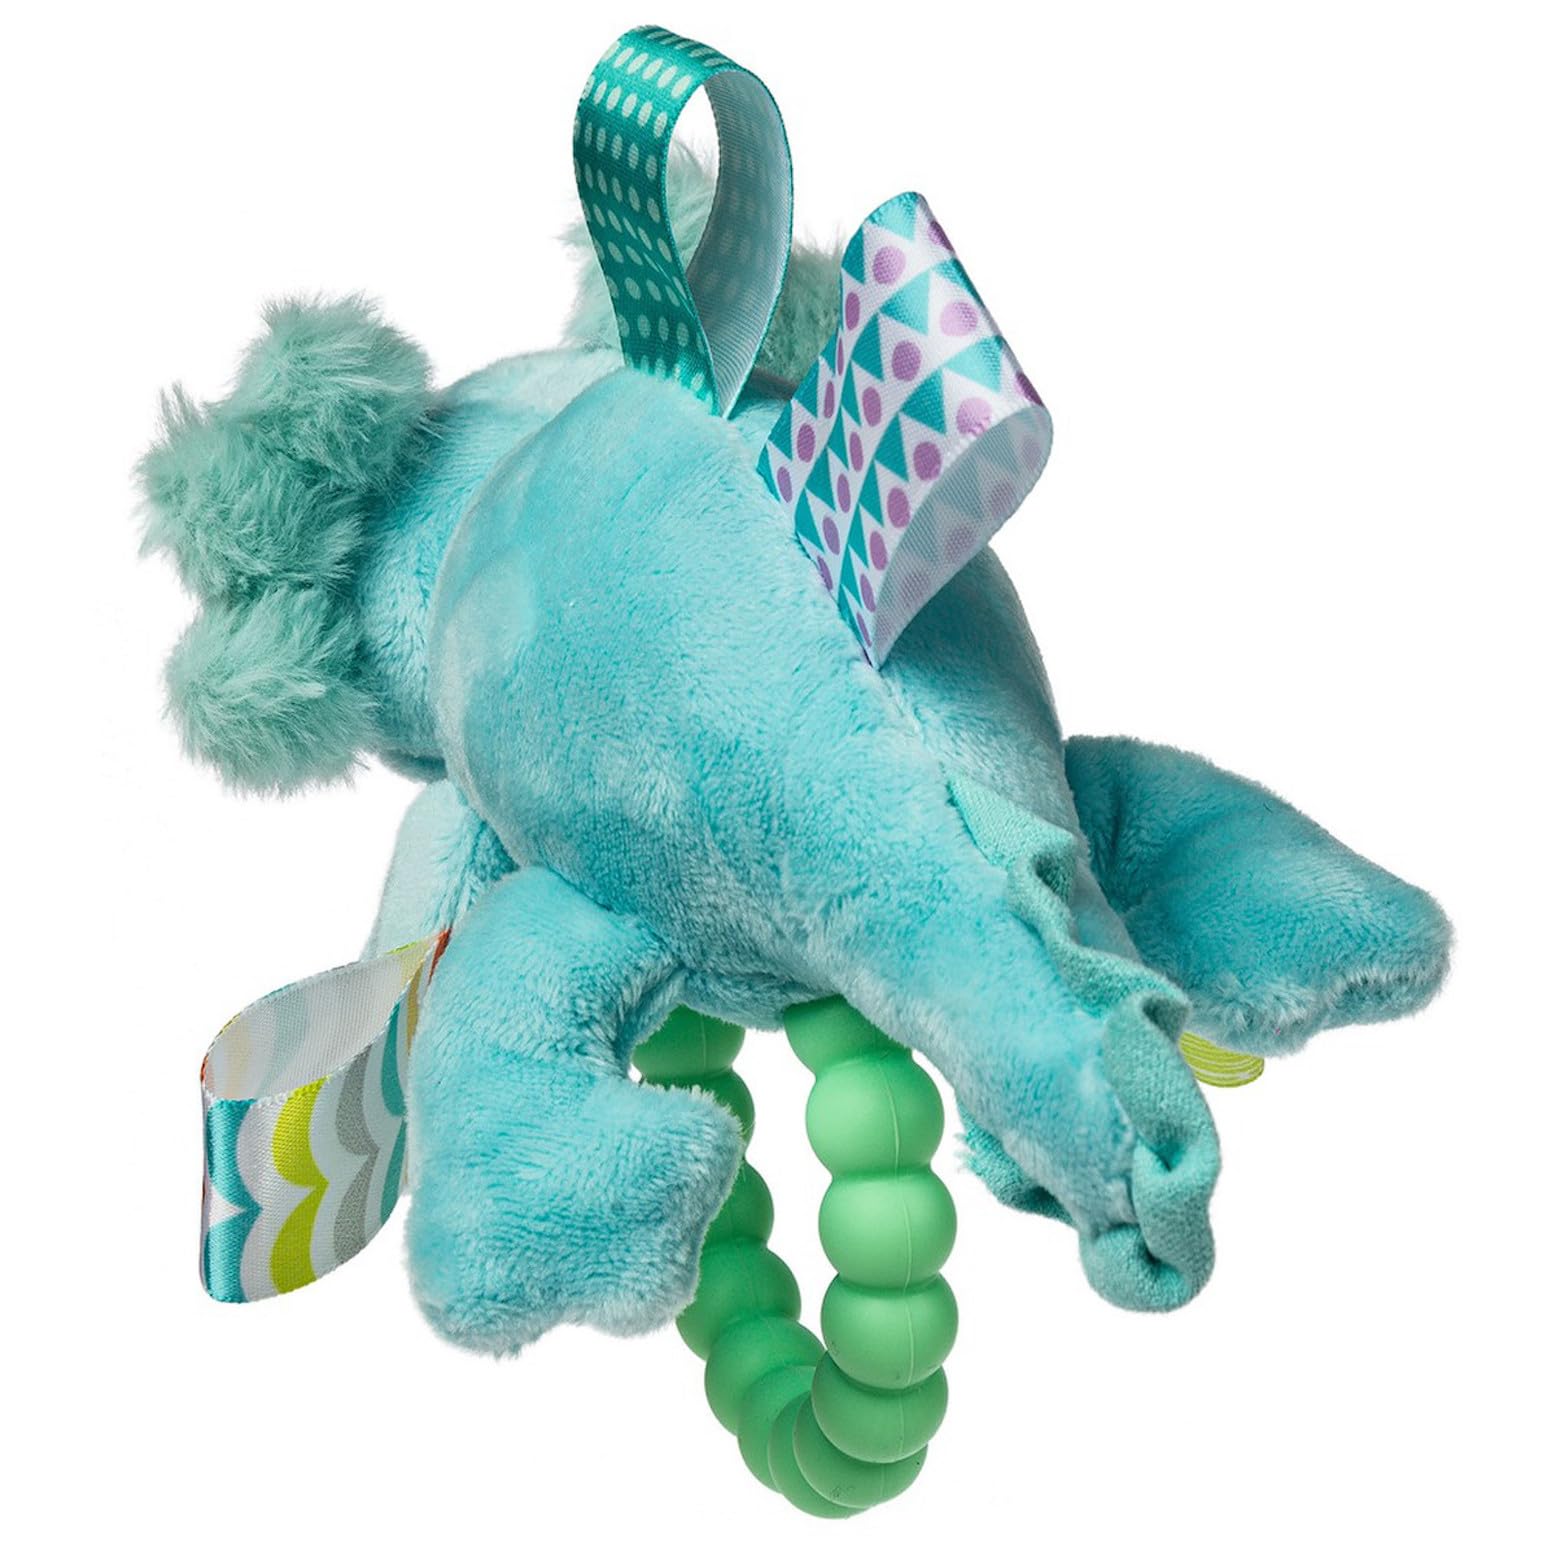 Taggies Soft Baby Rattle with Soothing Teether Ring and Sensory Tags, 6-Inches, Fizzy Aqua Axolotl